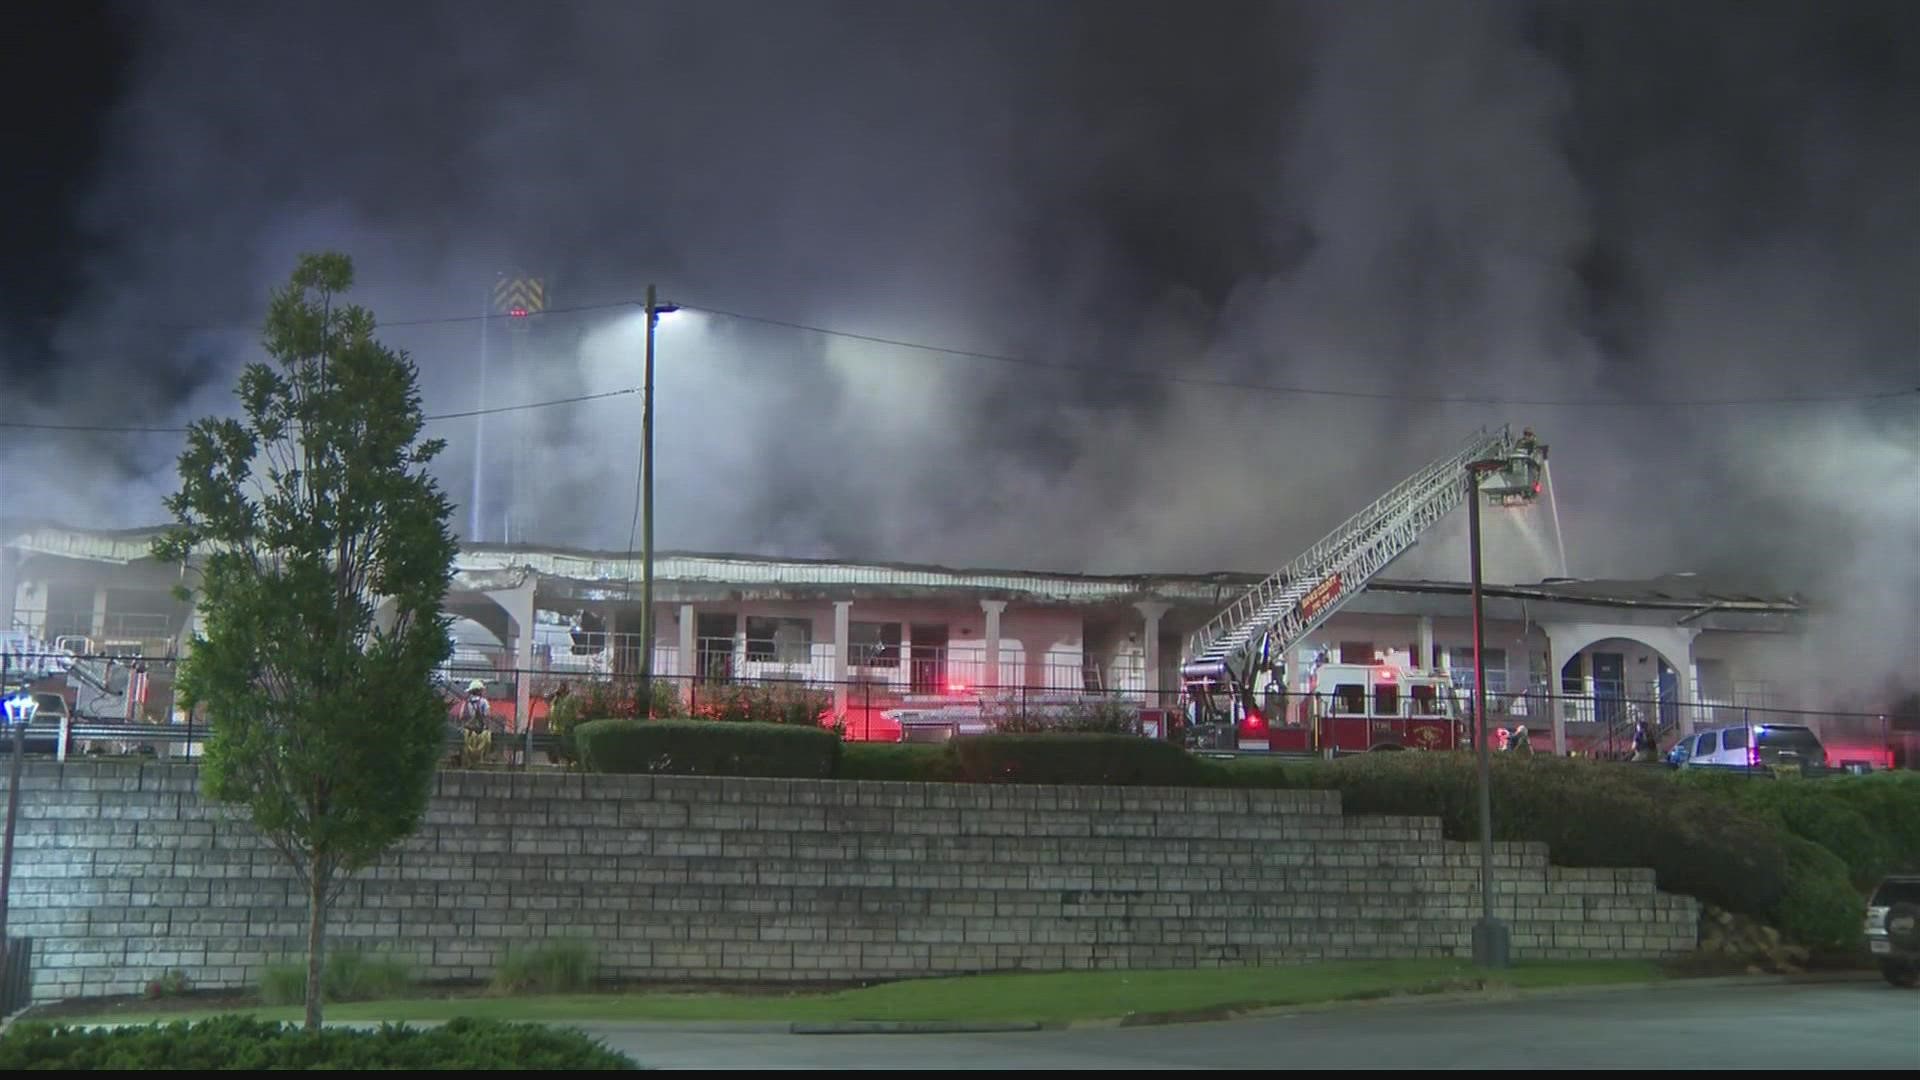 The fire was at a Motel 6, fire officials said no one was hurt.